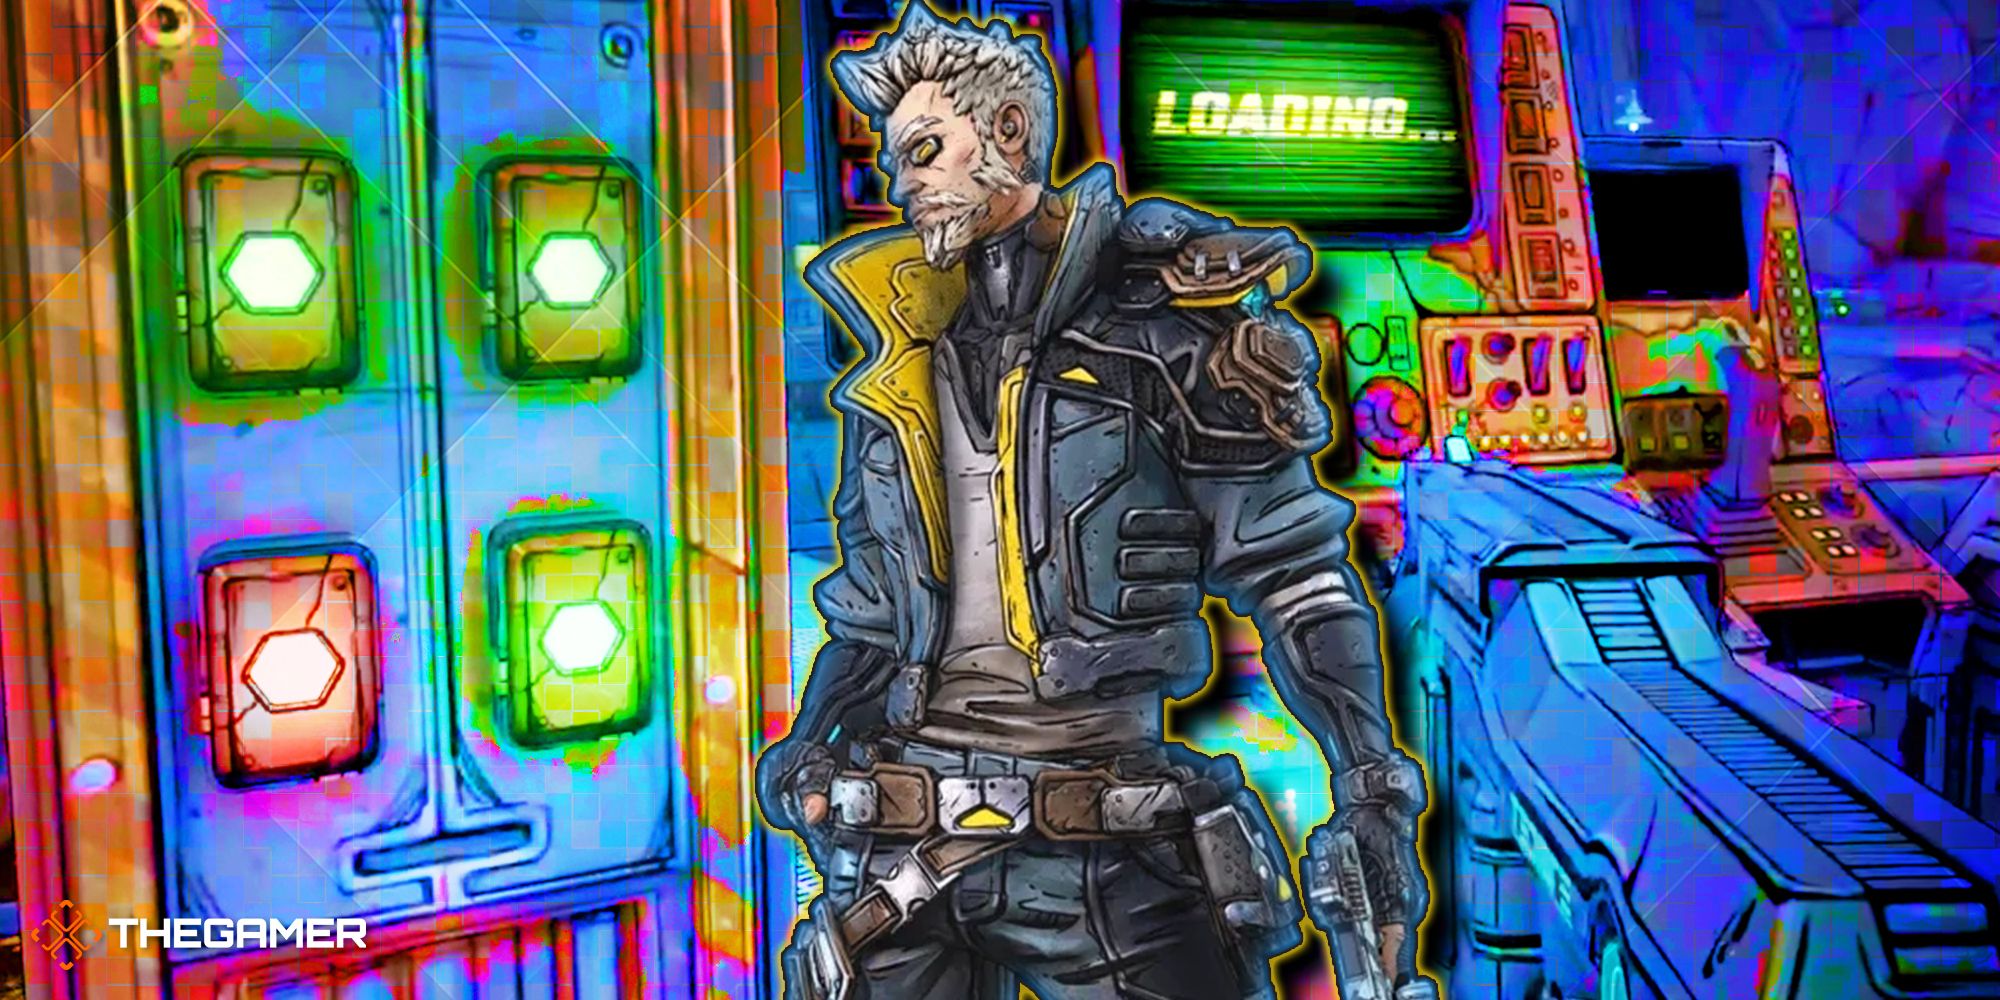 Game screen and art from Borderlands 3.